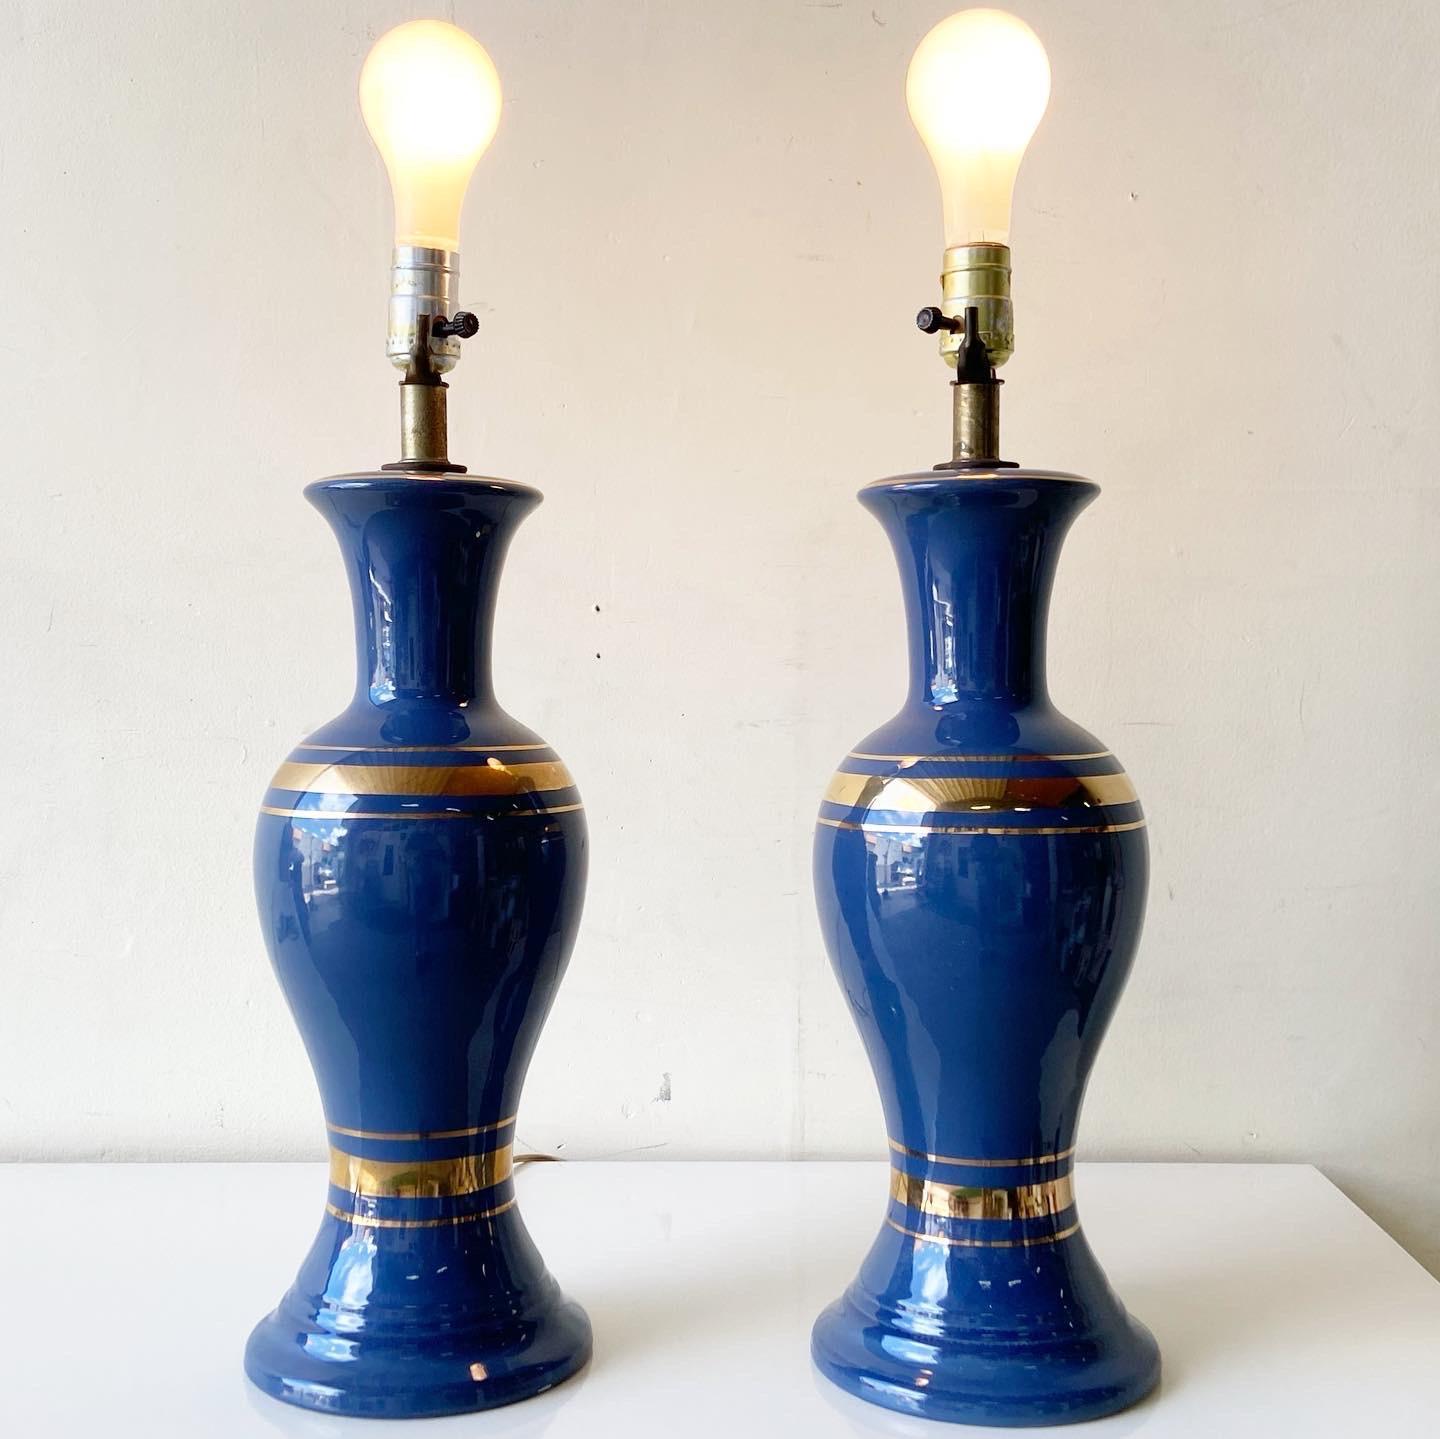 Exceptional Mid-Century Modern pair of table lamps. Each feature a blue vase with gold rings.

3 way lighting.